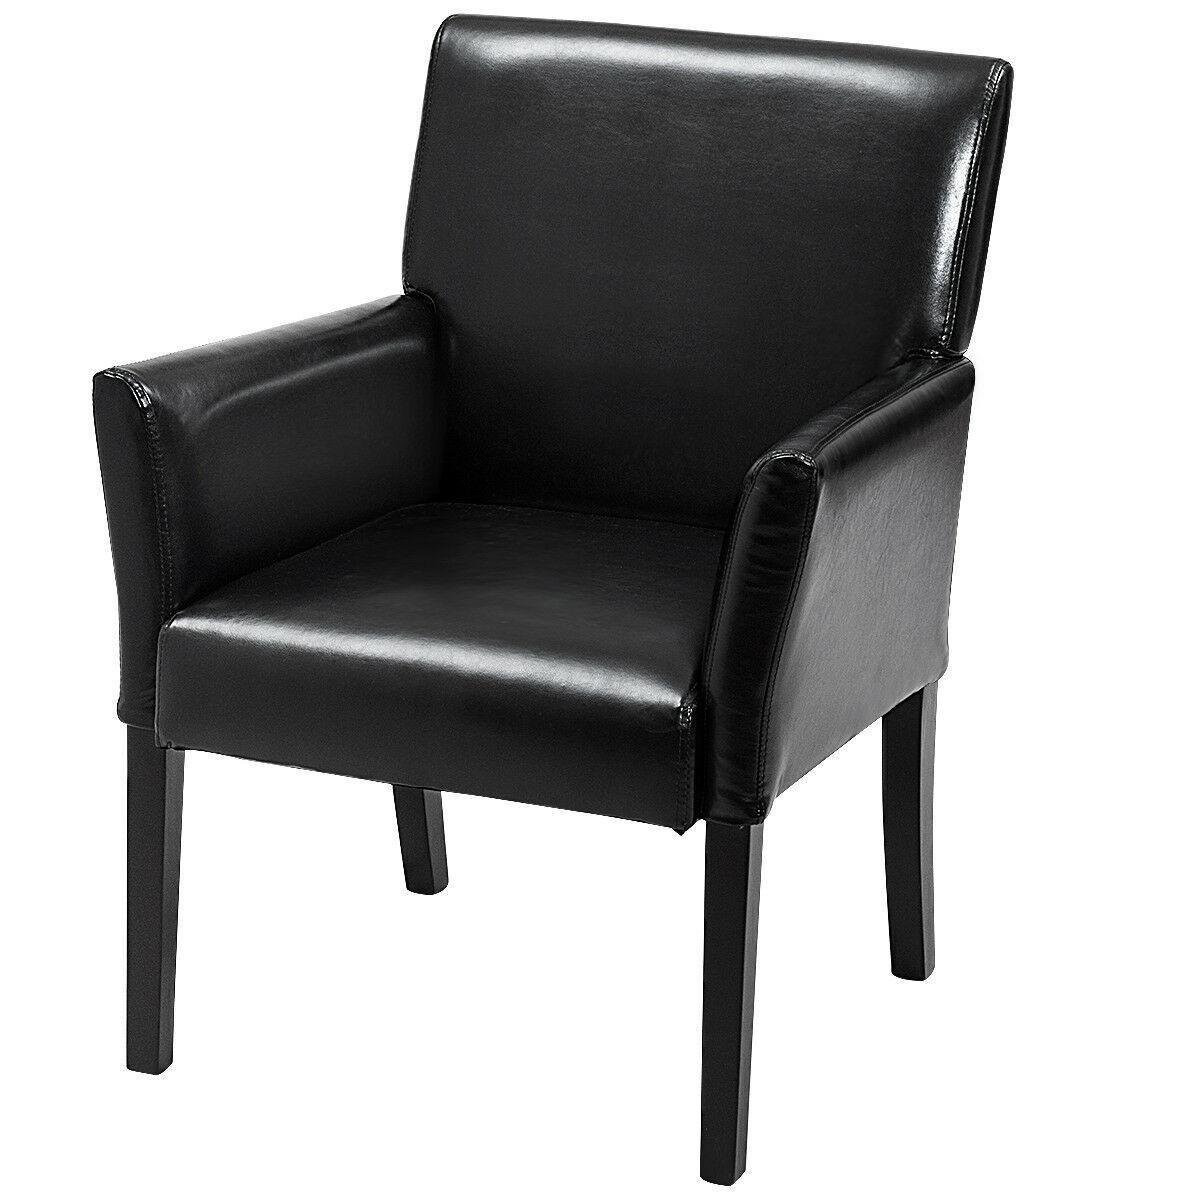 Giantex Executive Office Chair PU Leather Chair Reception Guest Seat w/Armchair & Upholstered,Black